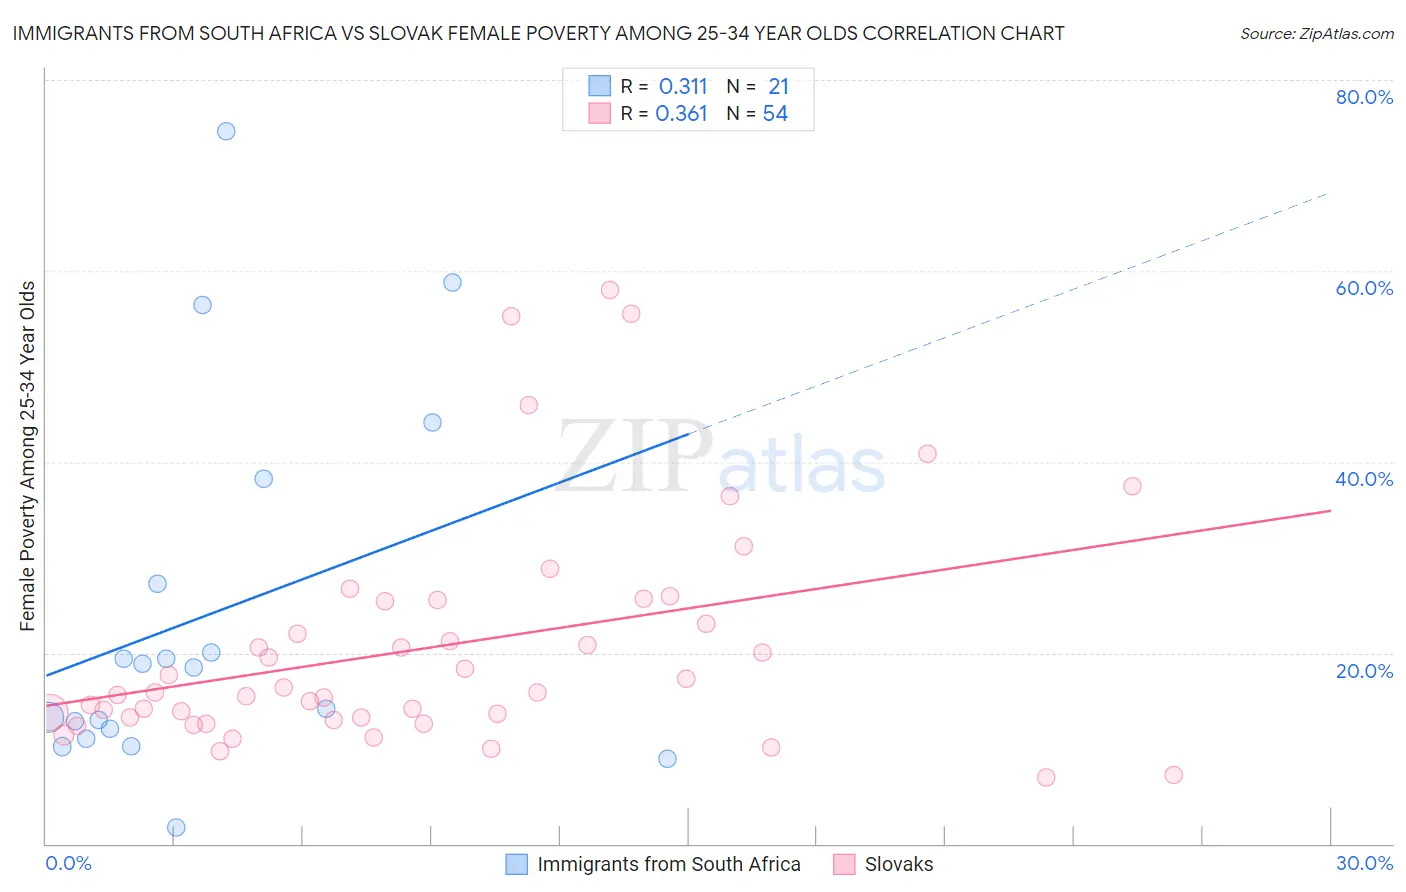 Immigrants from South Africa vs Slovak Female Poverty Among 25-34 Year Olds